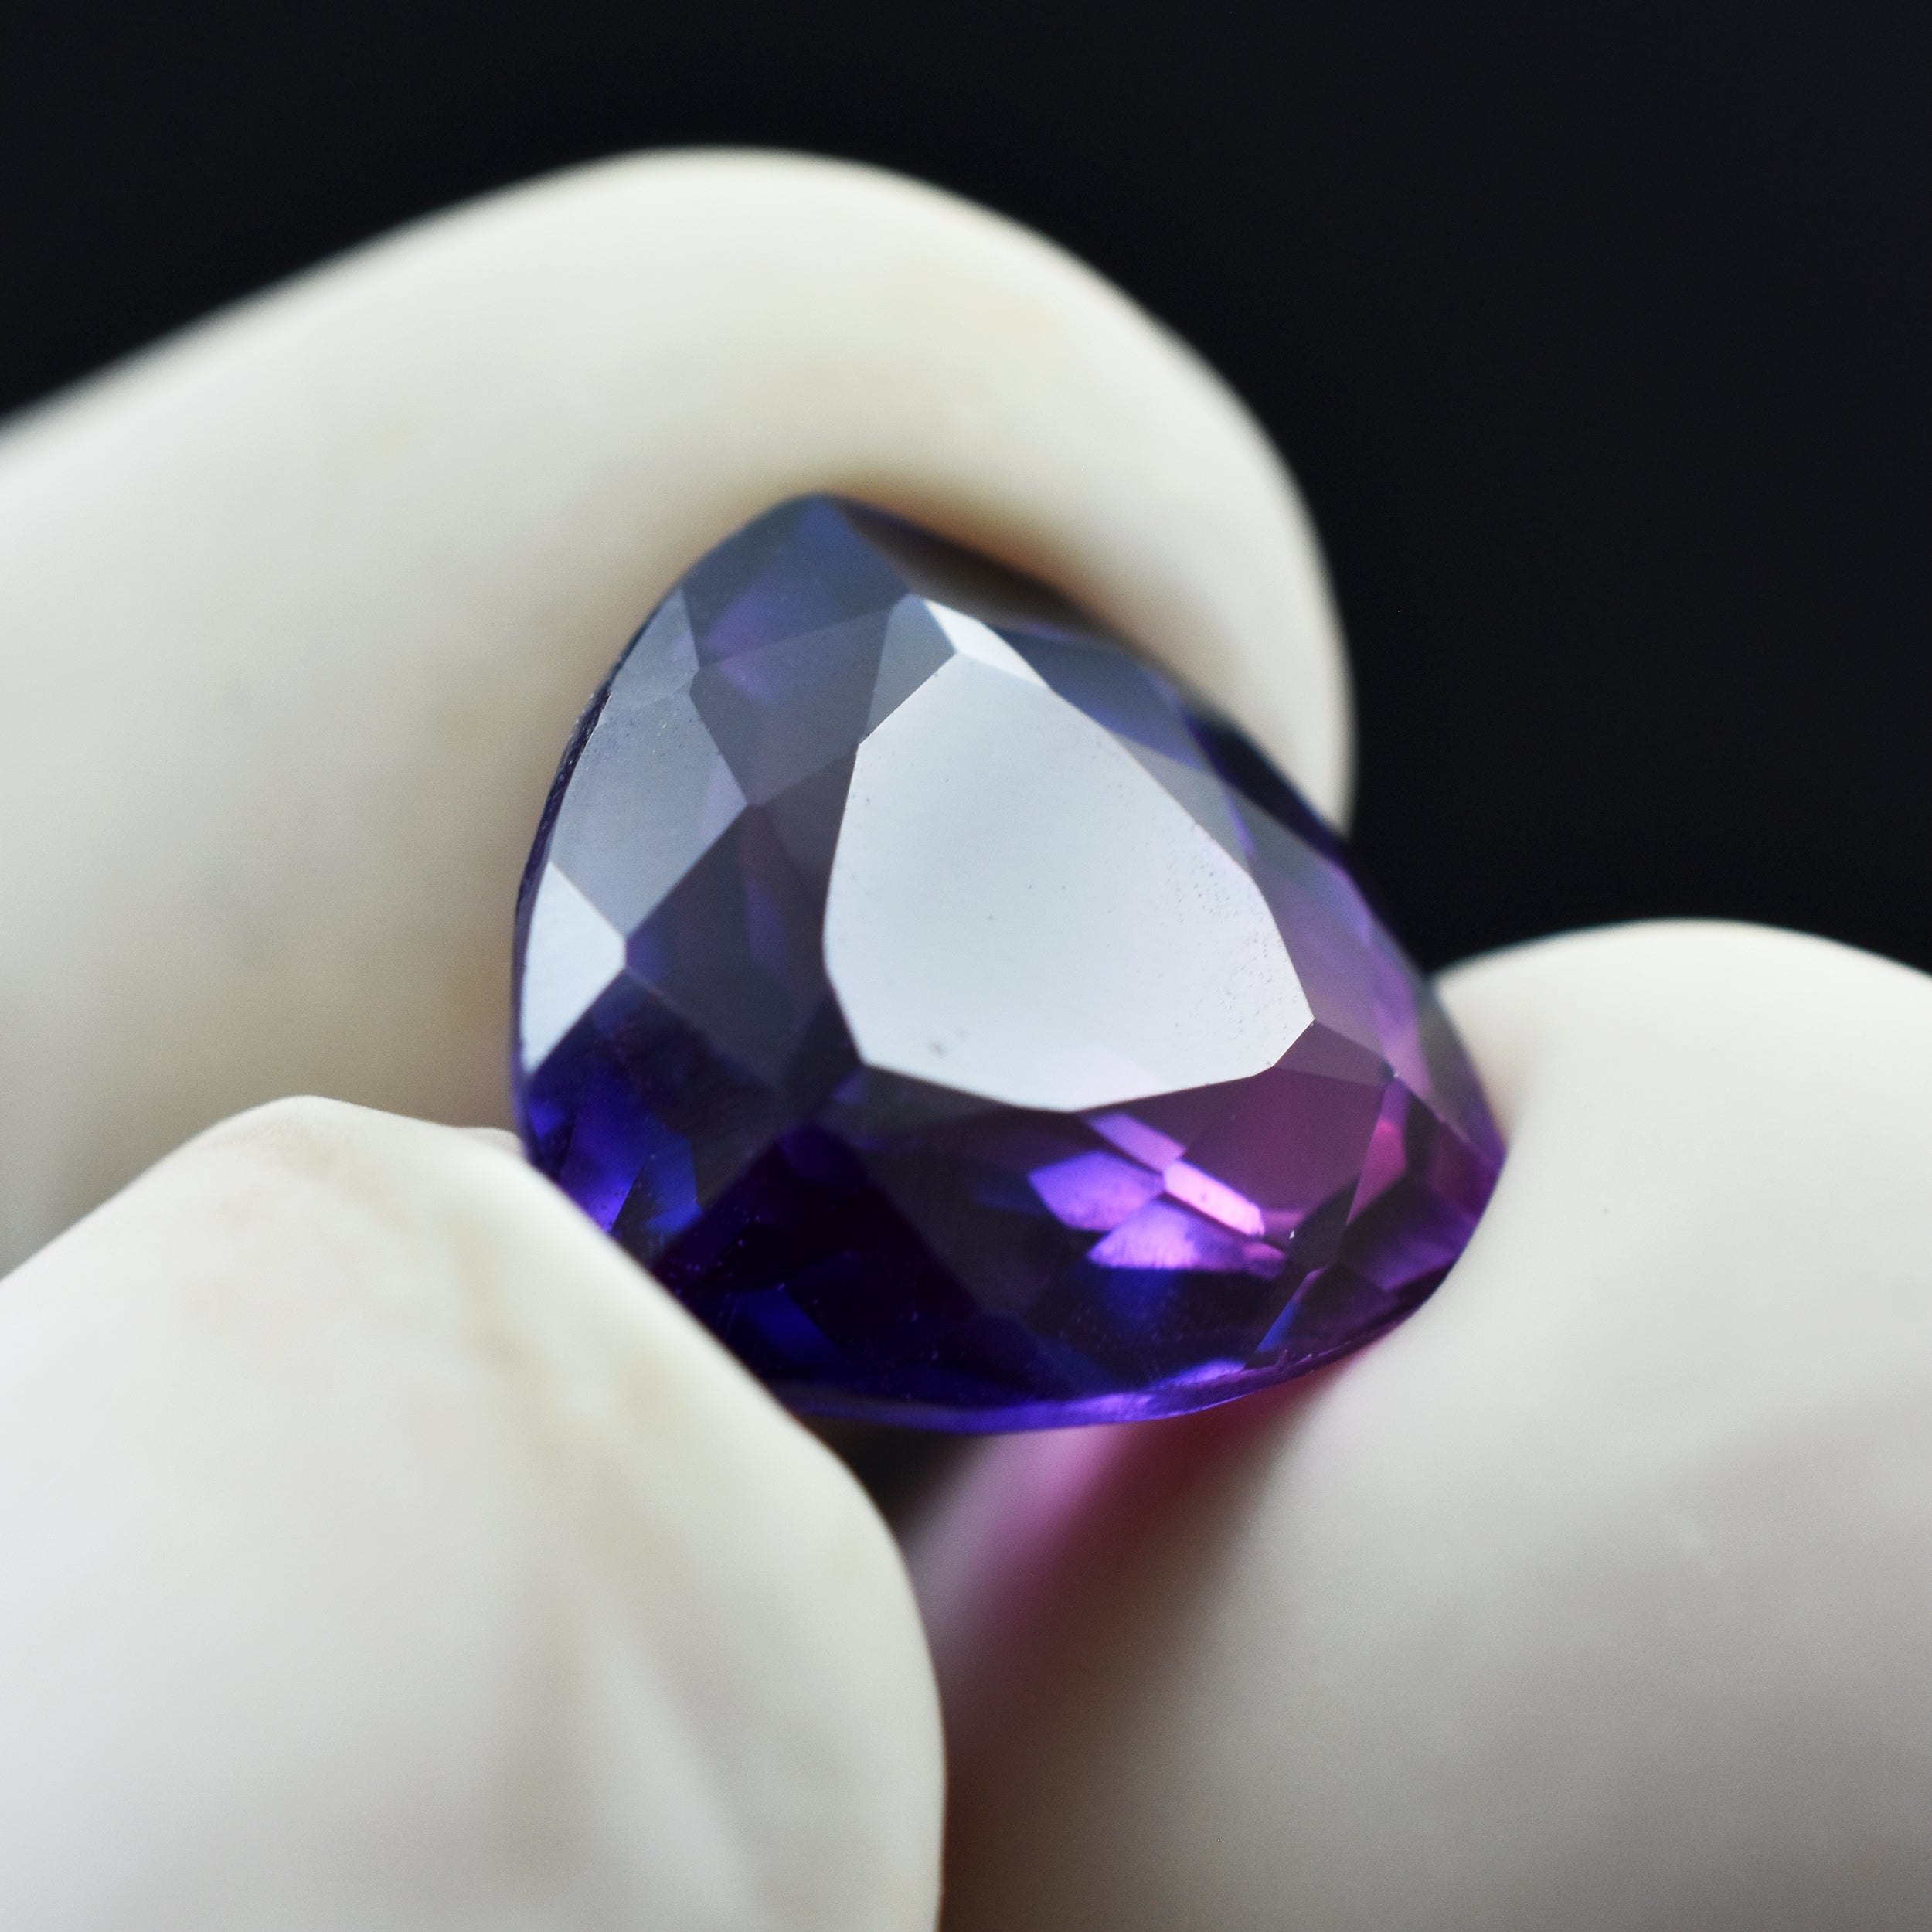 Stunning Sapphire From Sri Lanka 6.94 Ct Natural Purple Sapphire Color Change Certified Loose Gemstone | Free Delivery Free Gift | Best Price